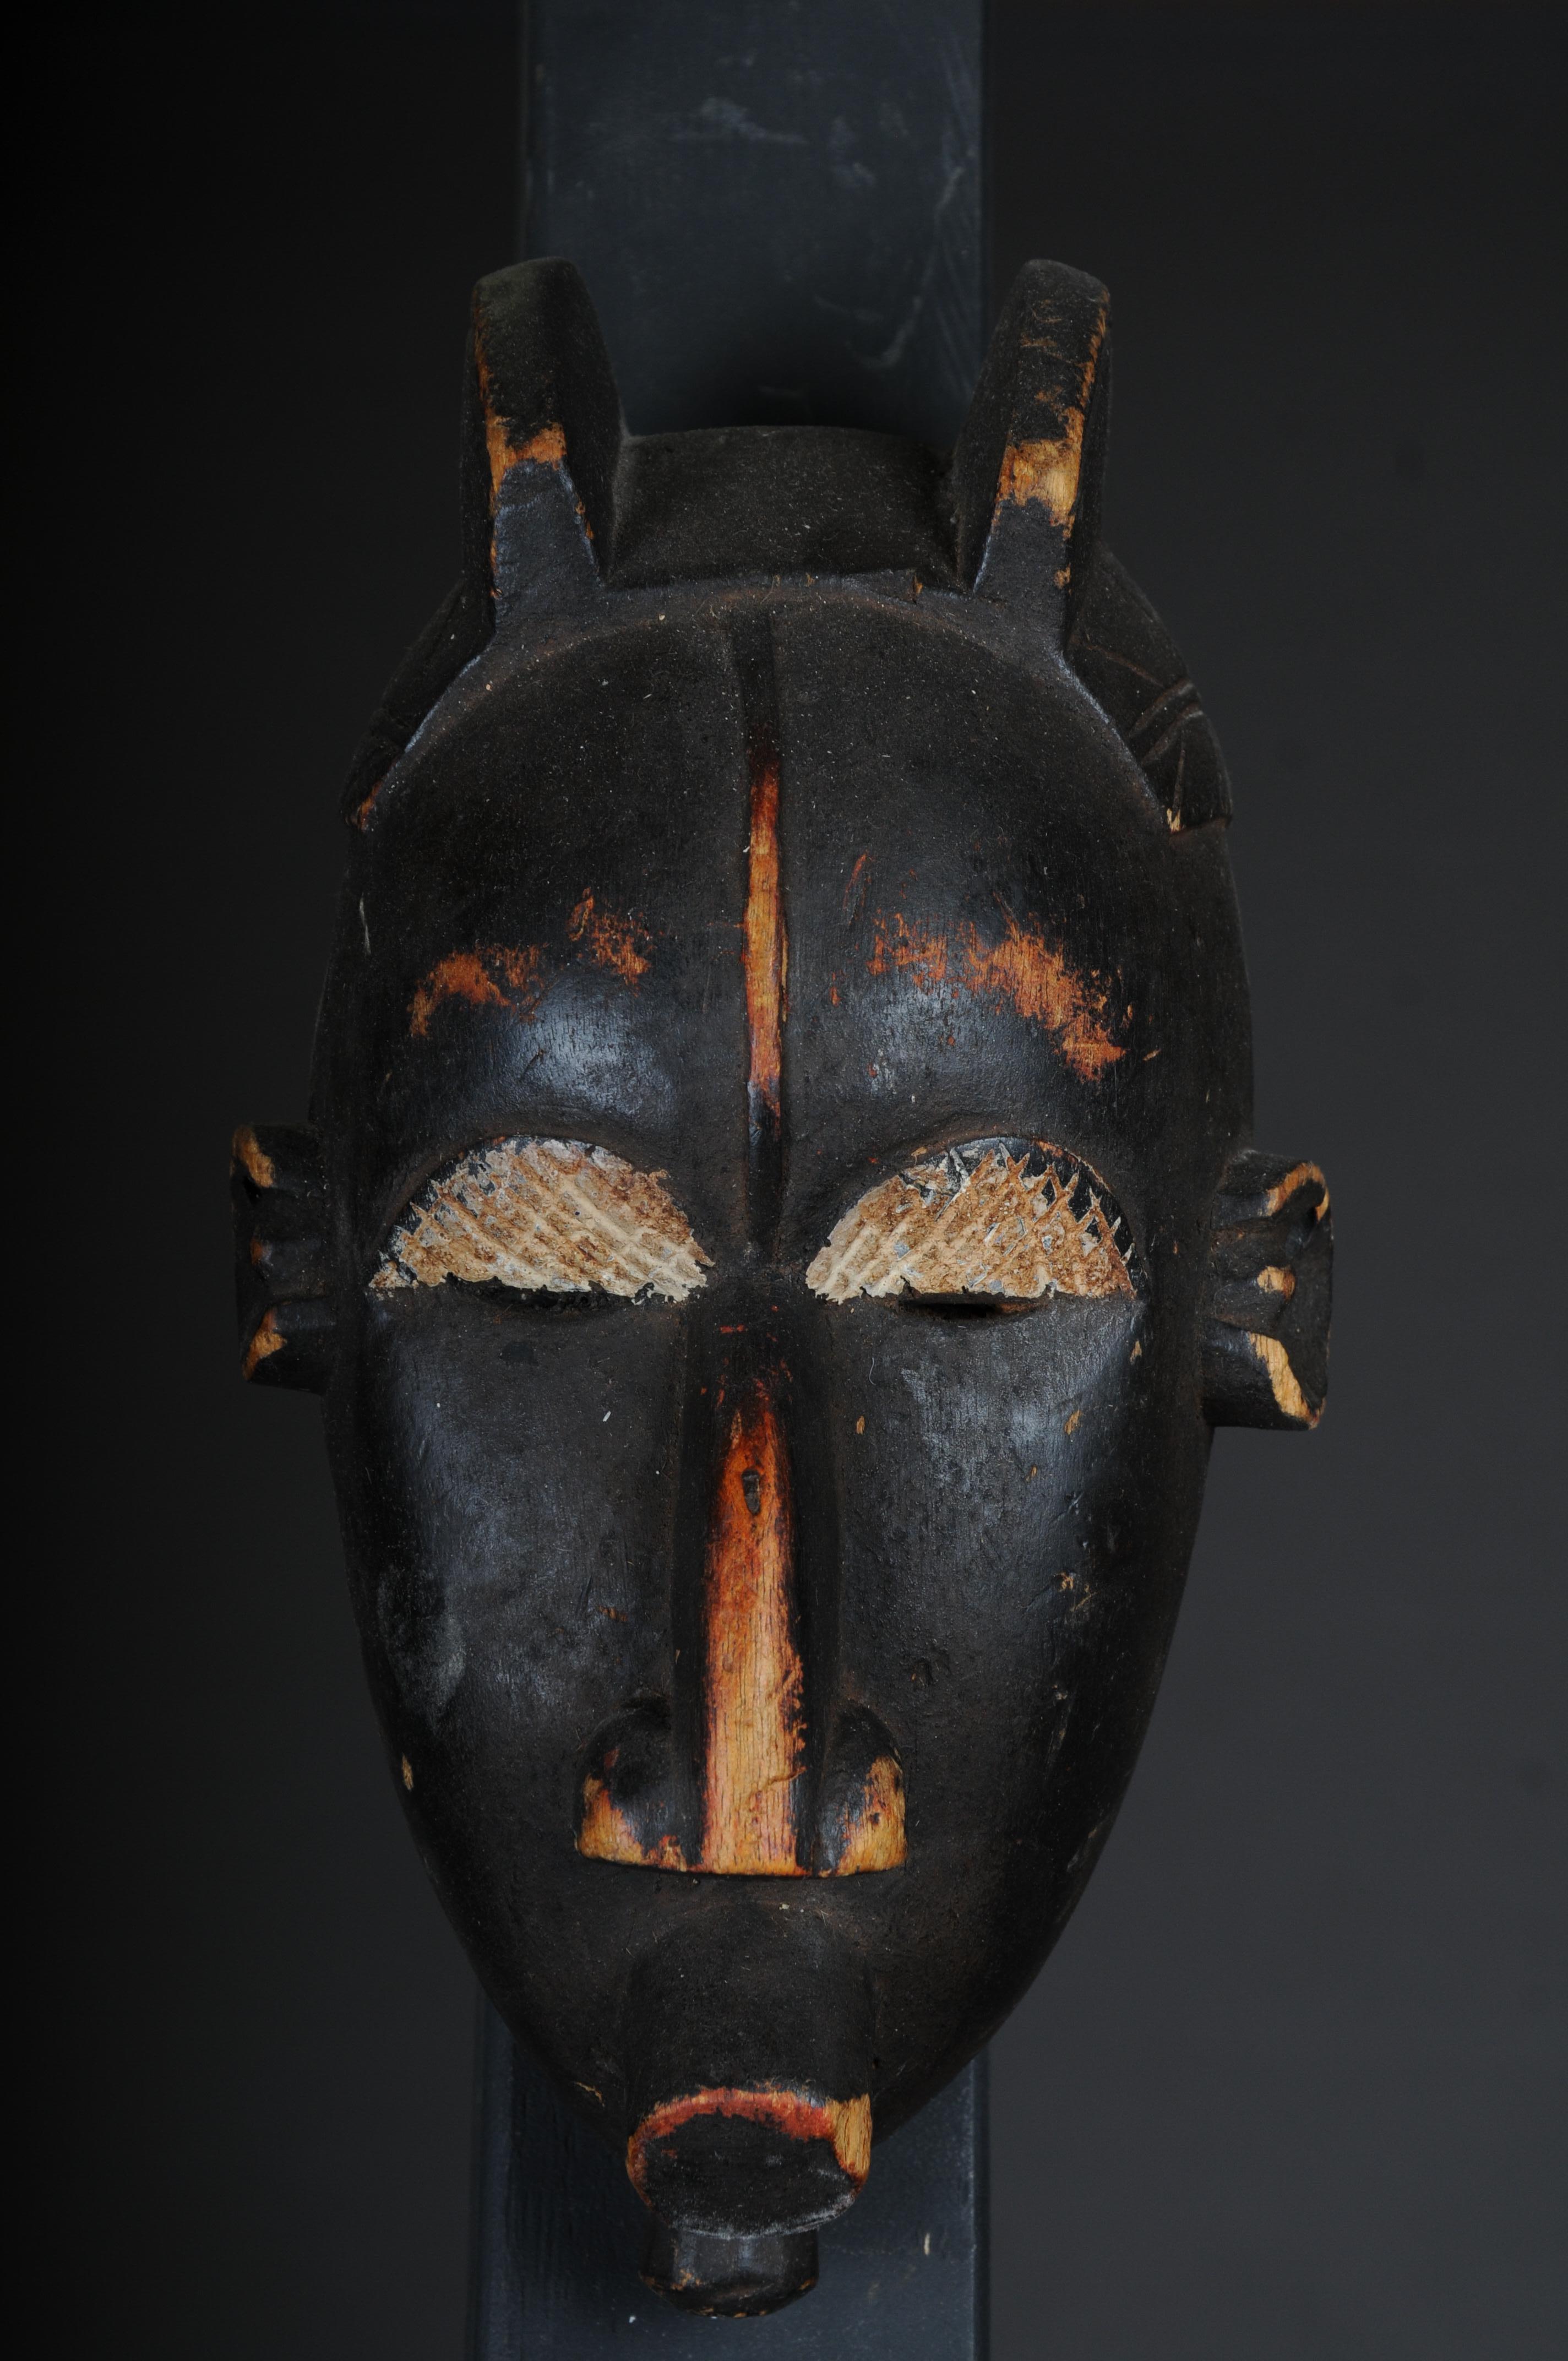 20th Century Antique Carved Wood Mask, African Art

Solid wood, hand-carved, Africa probably century

Very decorative. Comes from a Berlin private collection.